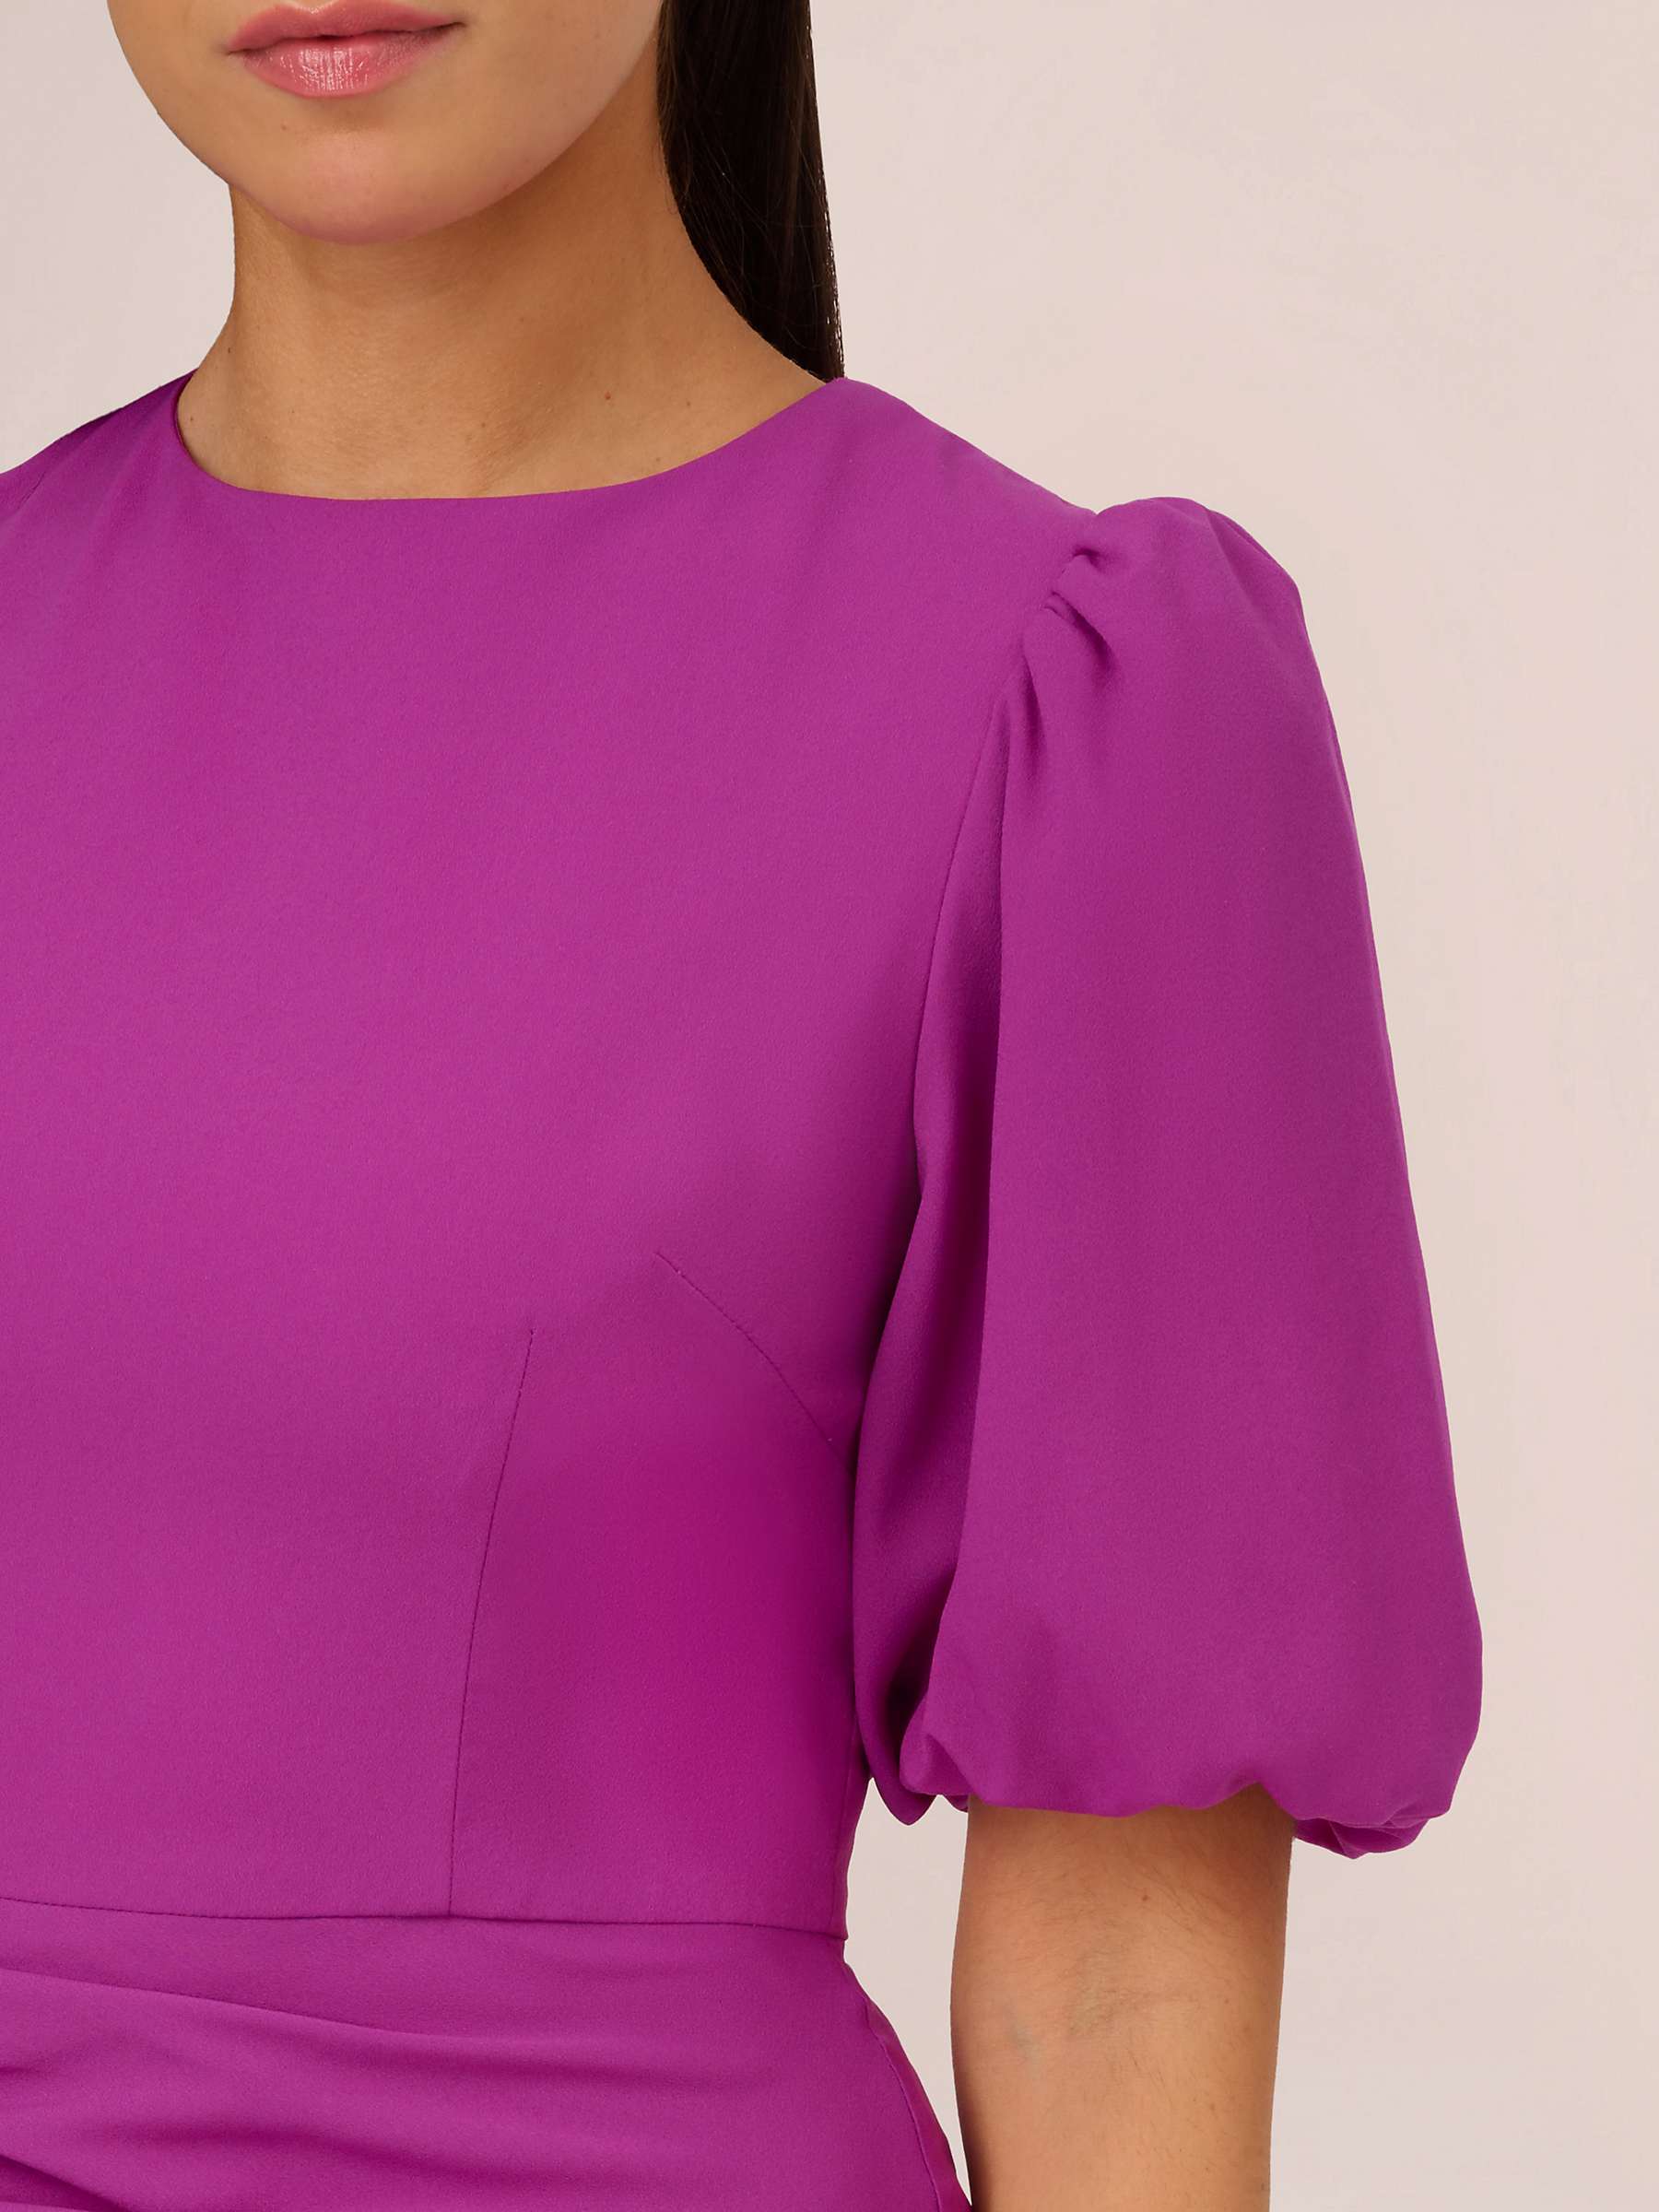 Buy Aidan by Adrianna Papell Stretch Mini Cocktail Dress, Wild Orchid Online at johnlewis.com